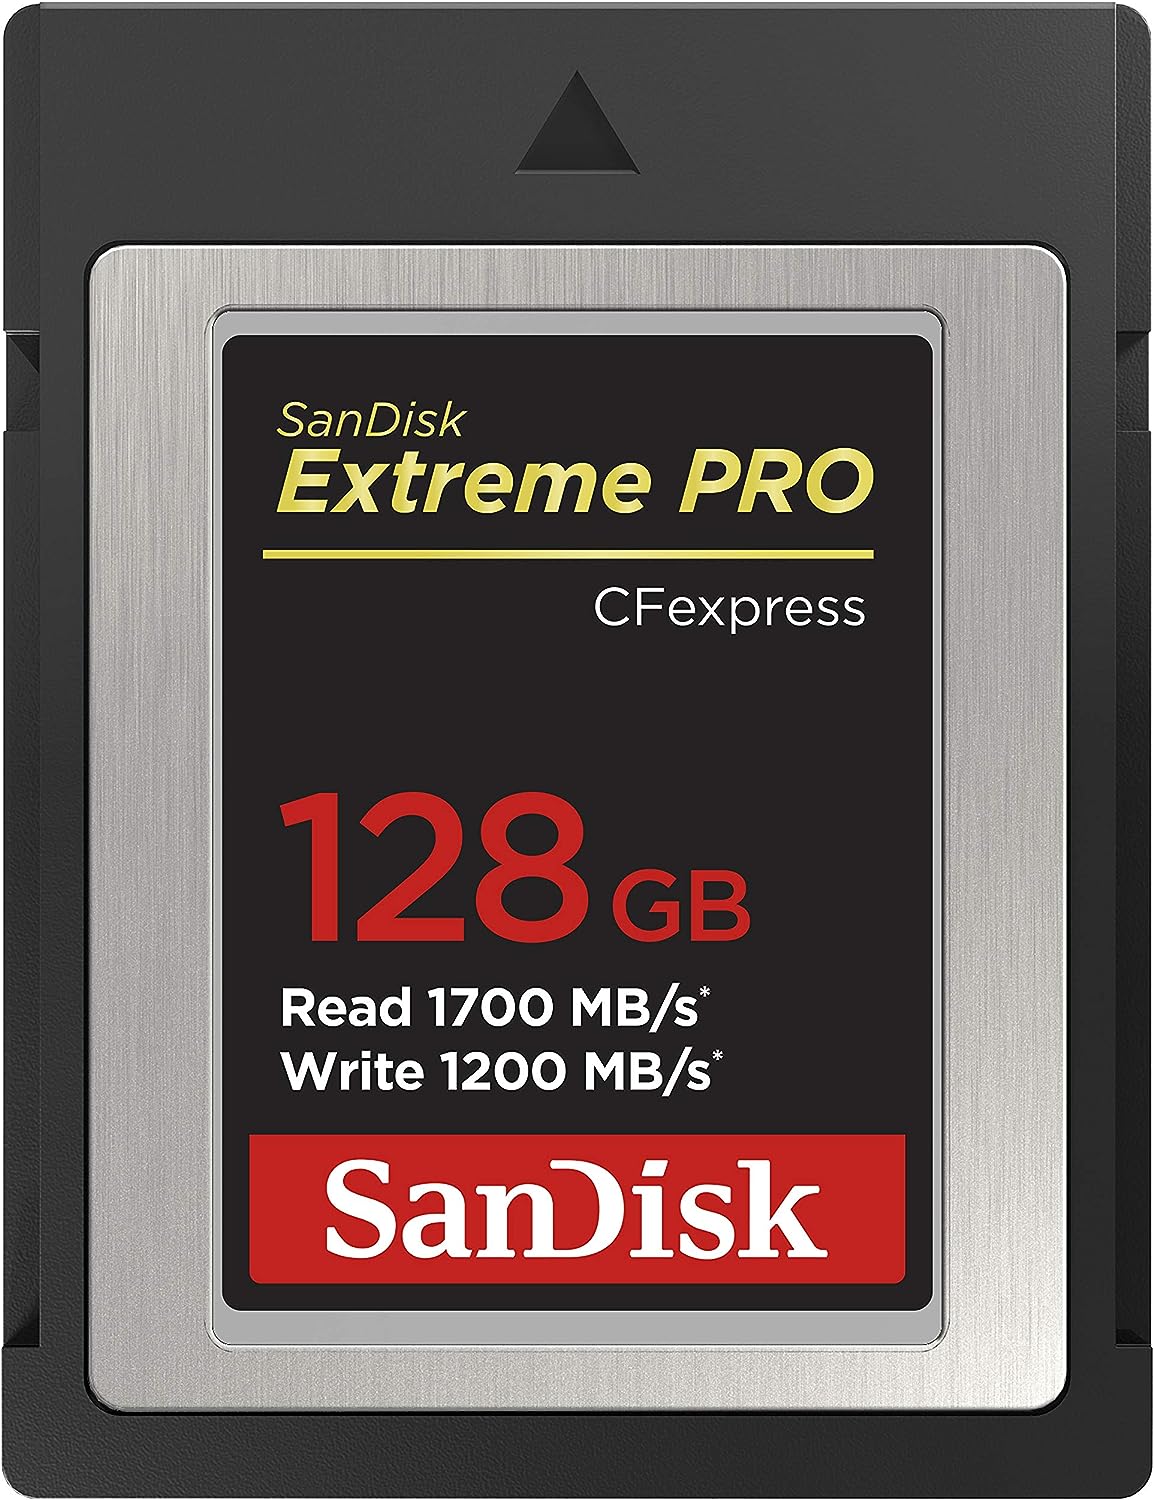 SanDisk 128GB CFexpress Card Type B Extreme PRO, 1700MB/s Read, 1200MB/s Write